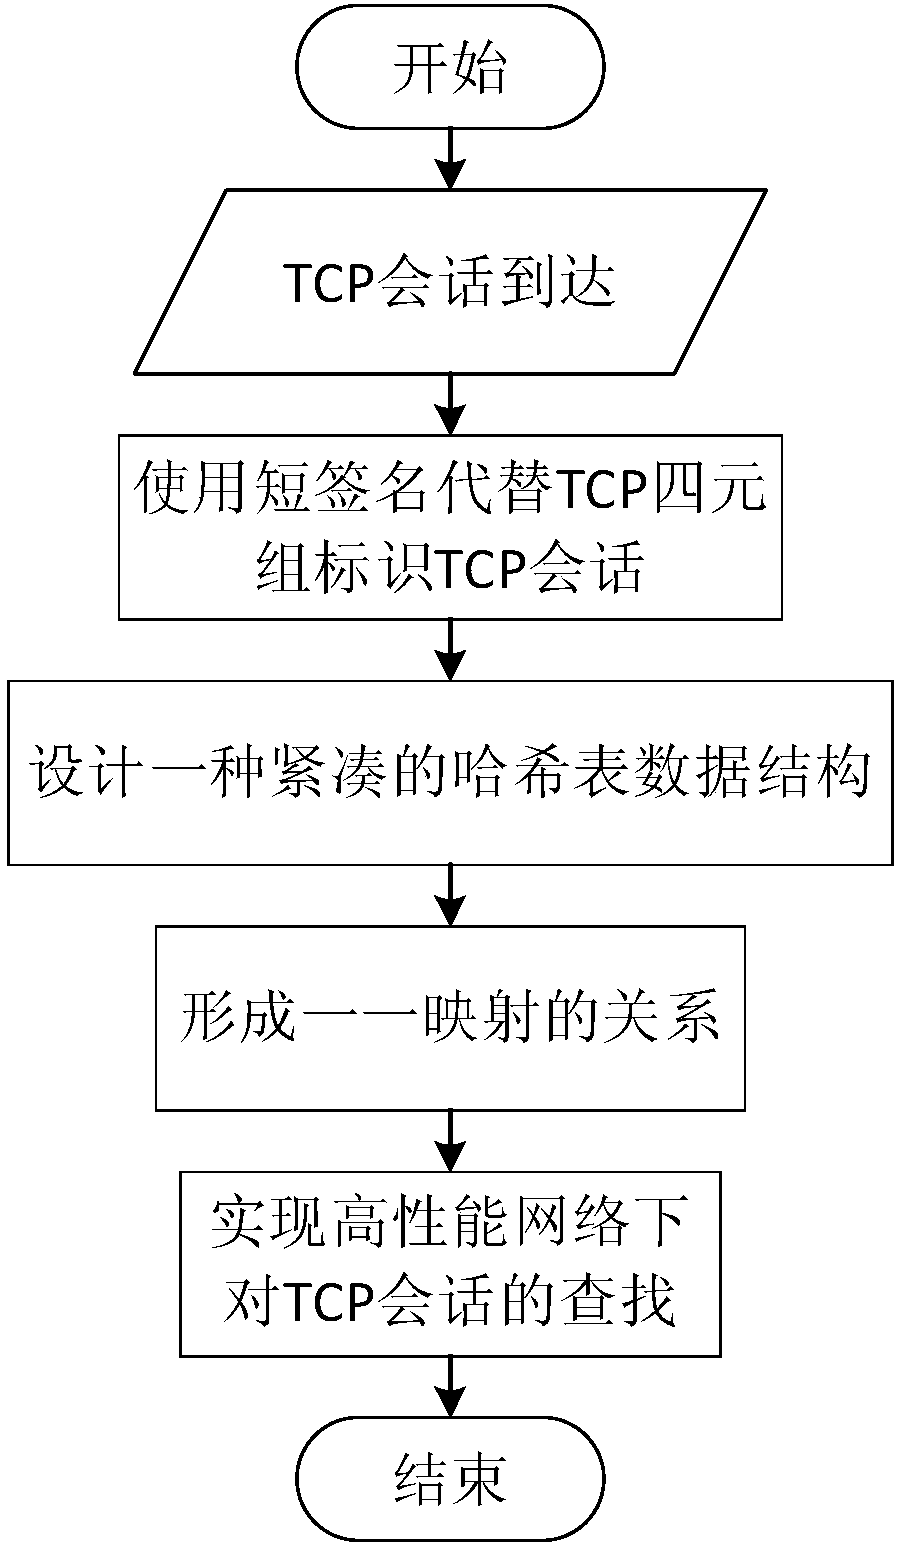 TCP search optimization method under high performance calculating network